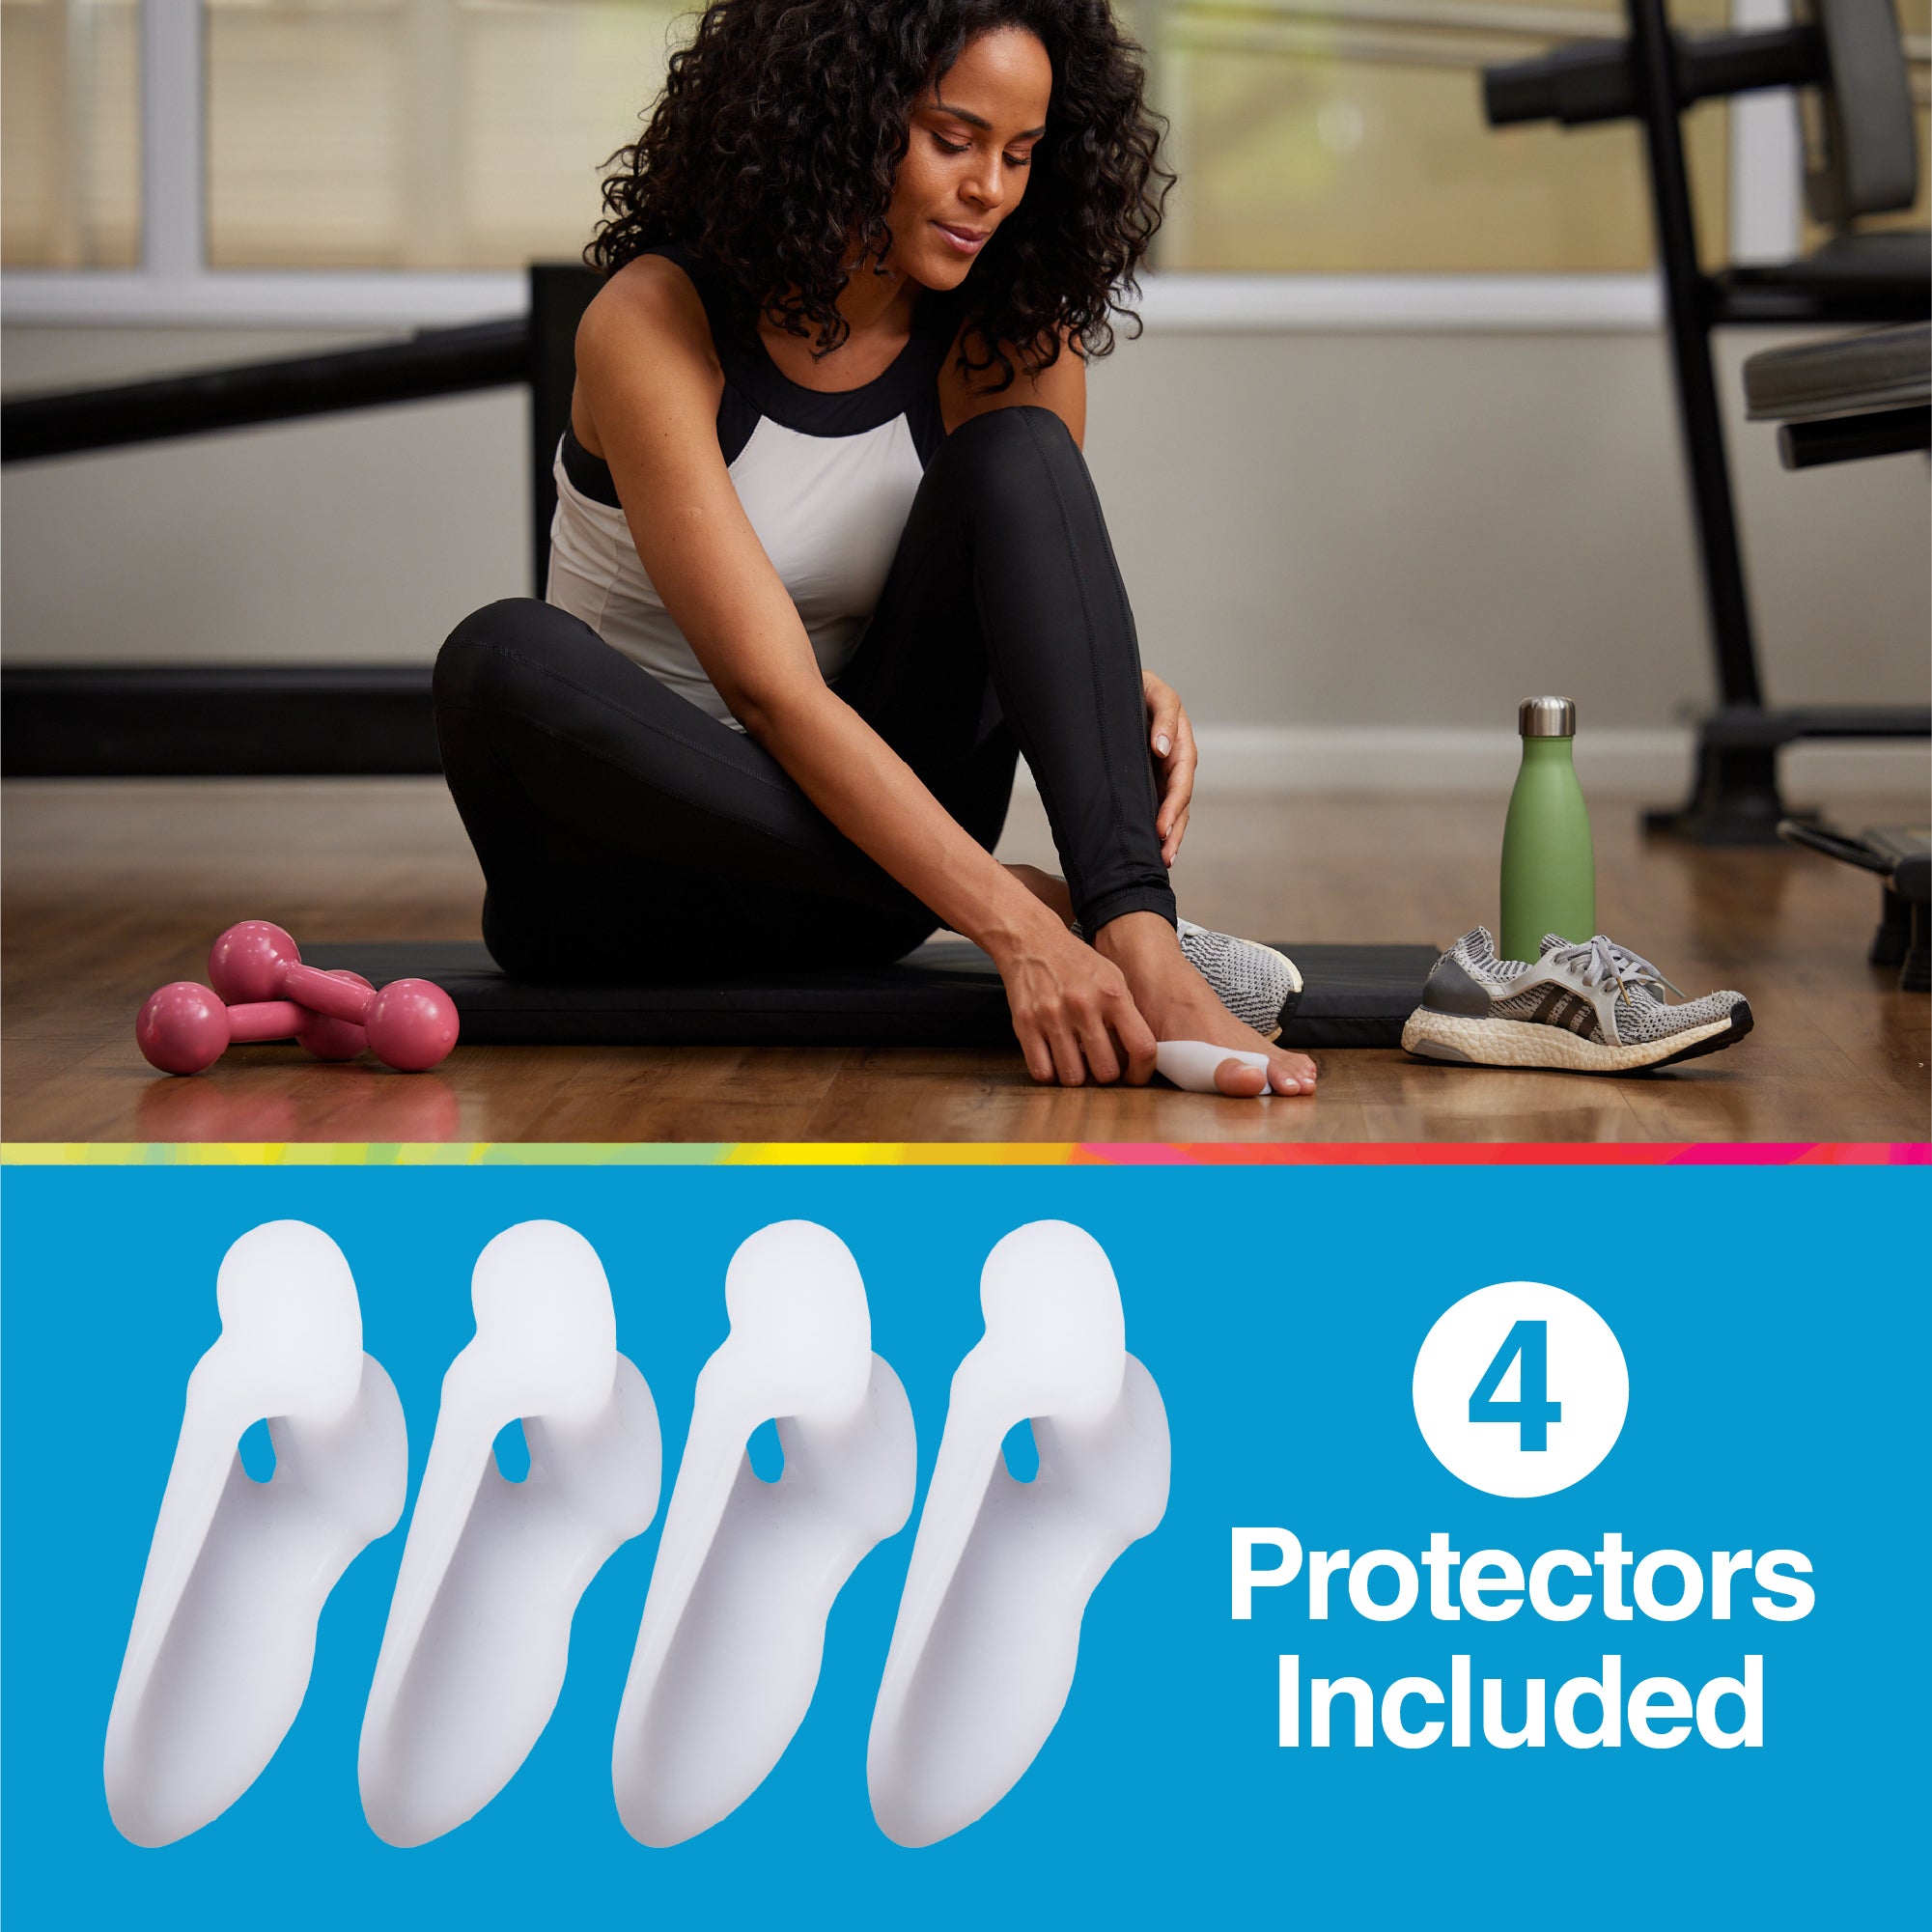 Bunion Protector with Attached Toe Separator - ZenToes